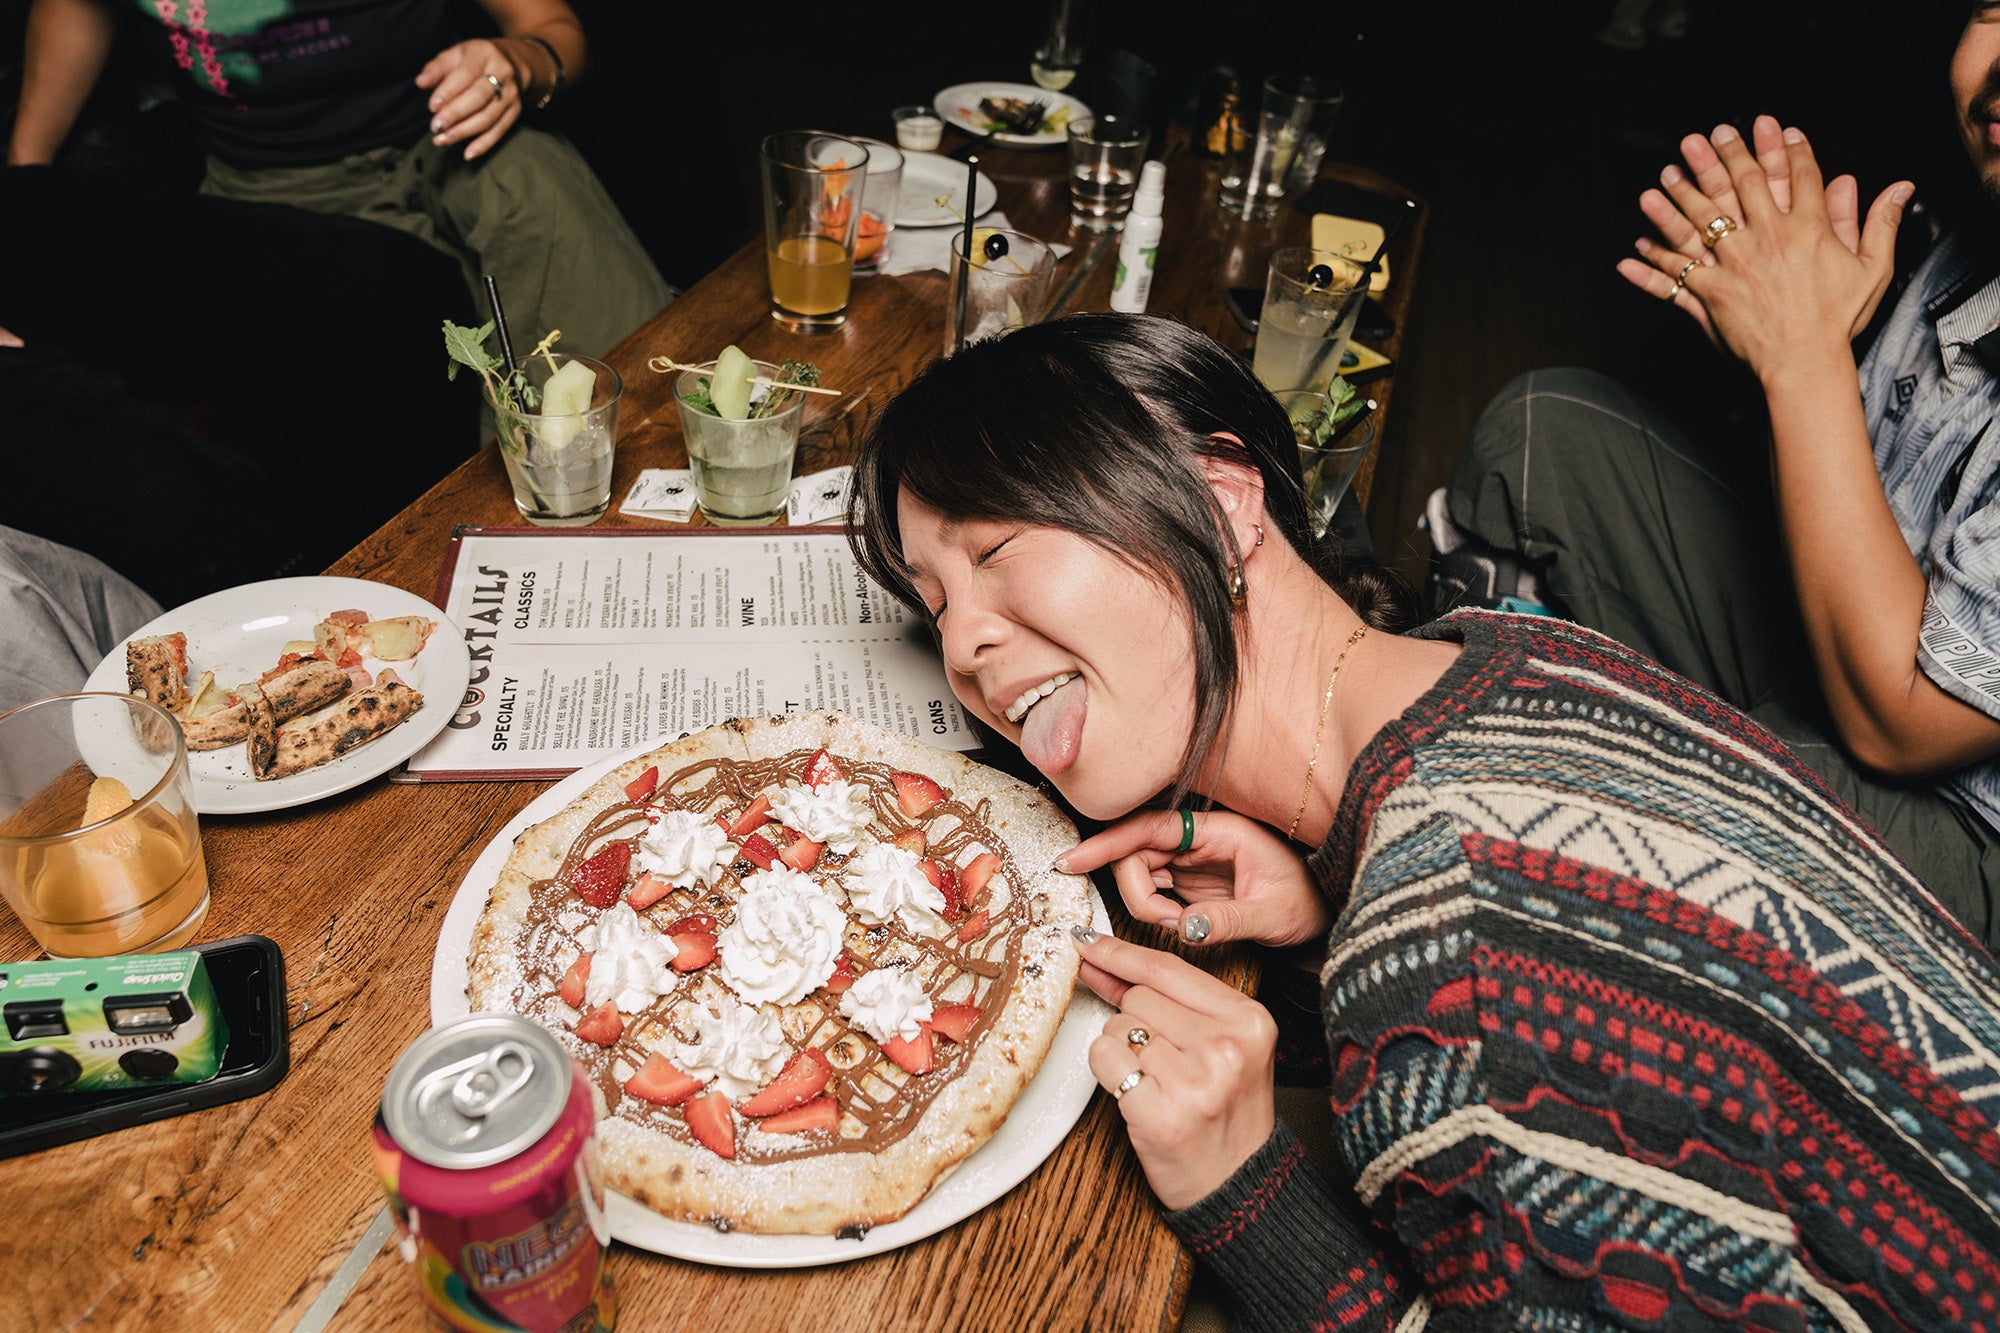 A young lady is excited about her dessert pizza.